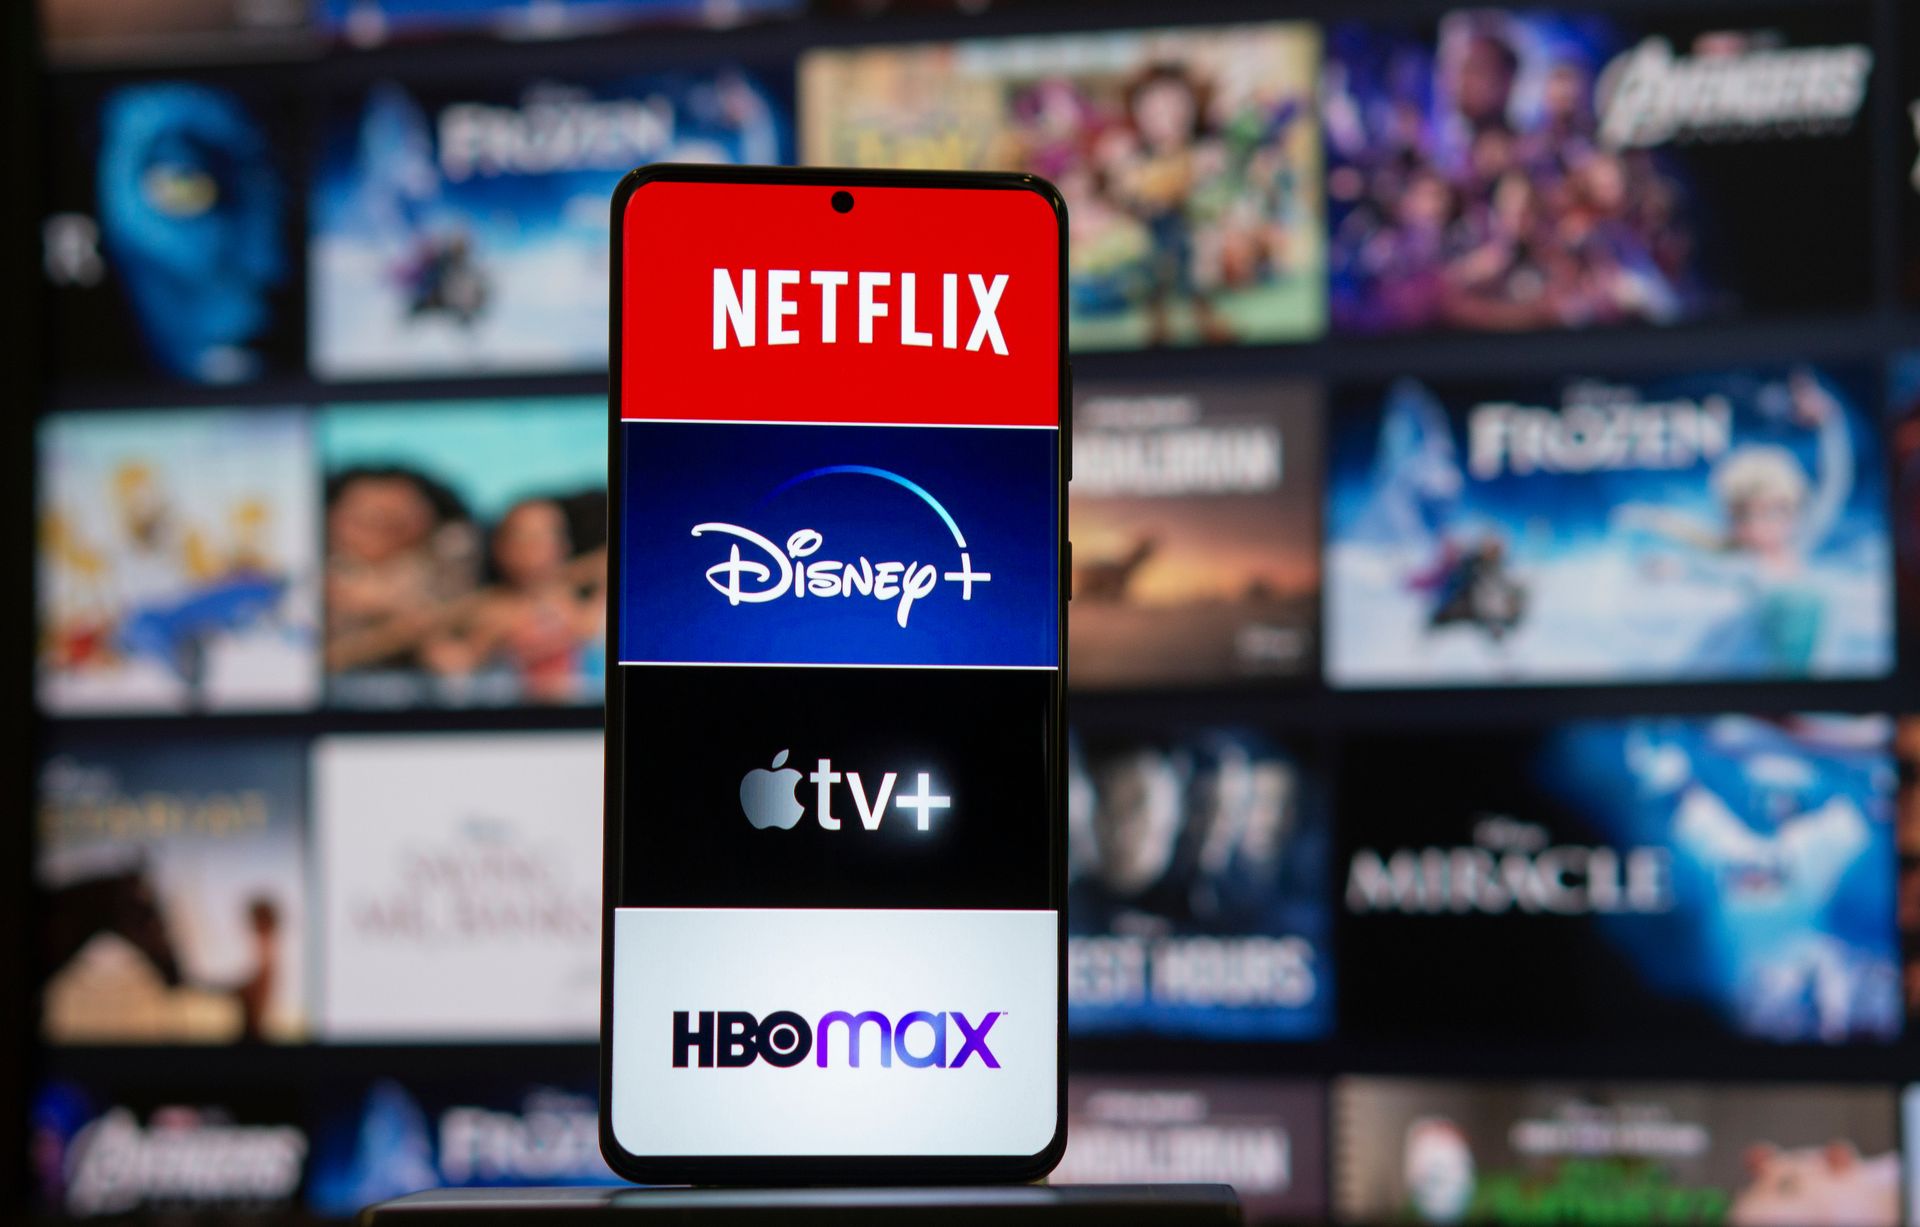 How To Get Netflix Disney Plus Hbo Max And More For Free With Your Phone Plan Toms Guide